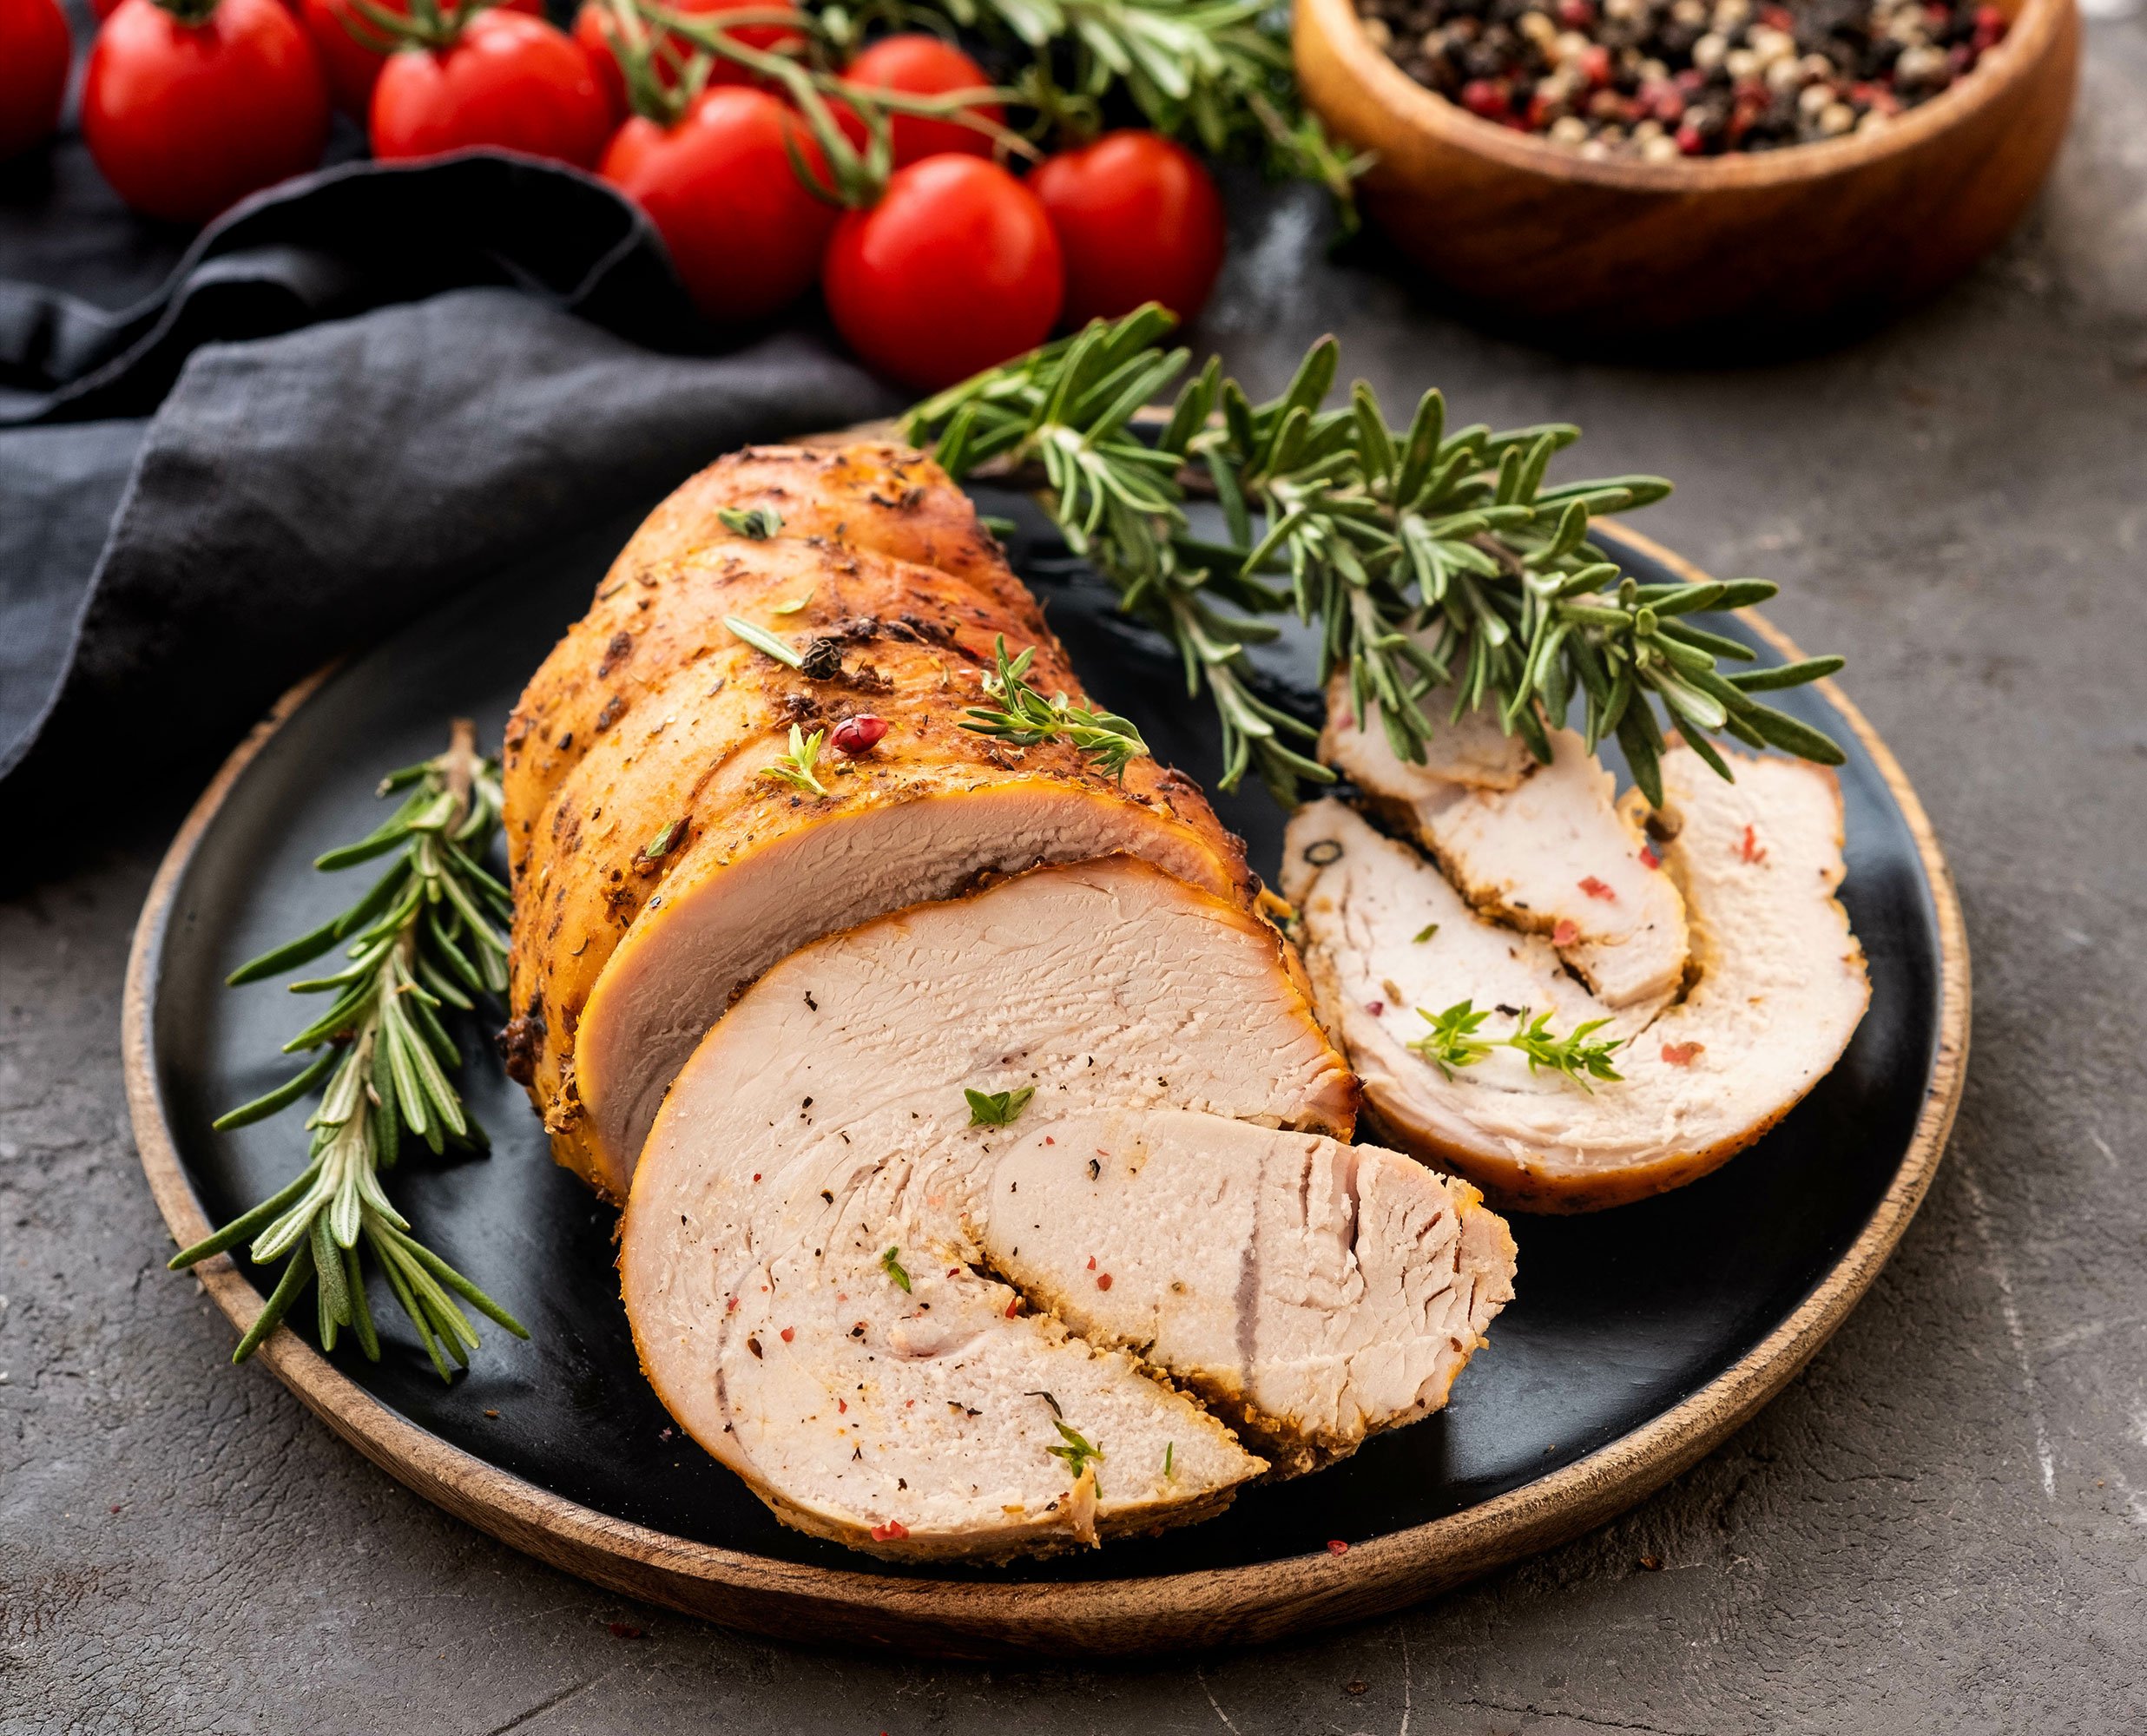 Turkey Breast Brine with Cranberry Seltzer - Just Cook by ButcherBox